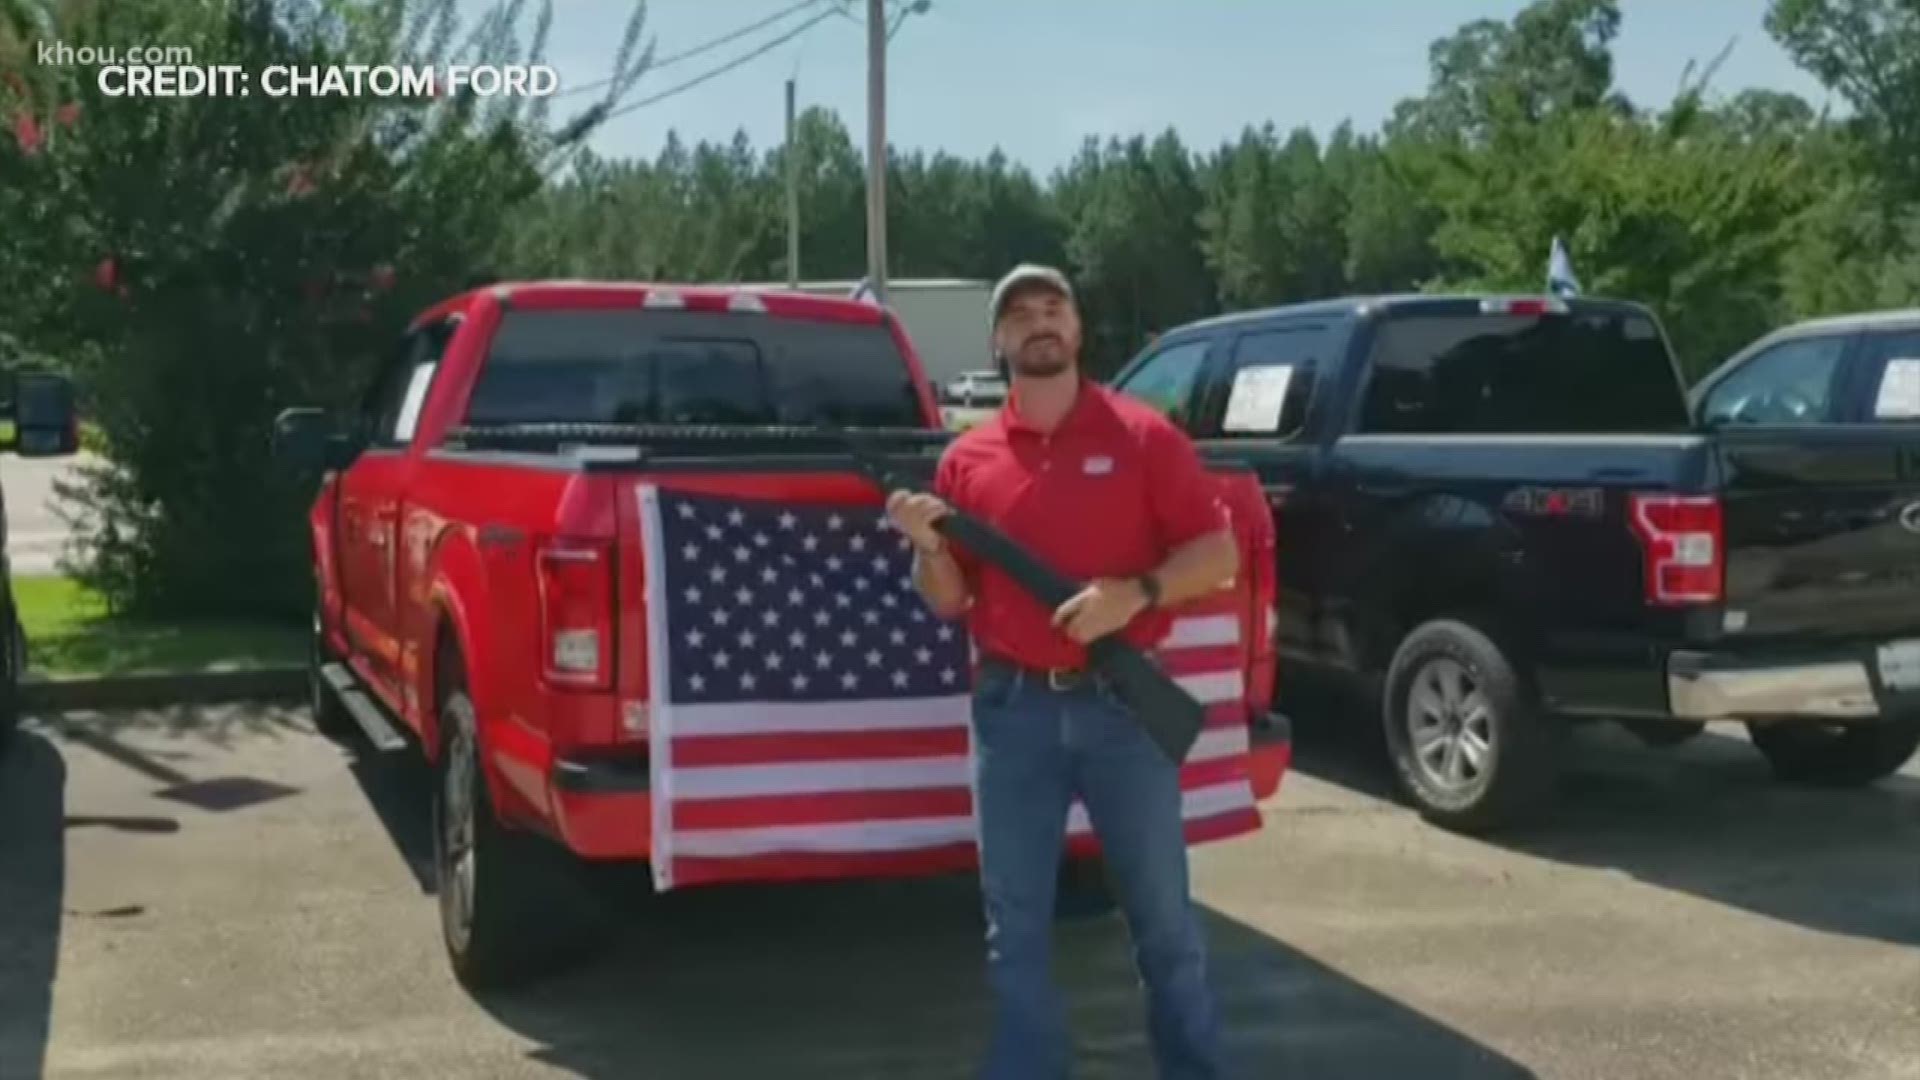 A Ford dealership in Alabama has an unusual giveaway going. They're giving away a Bible, American flag and a 12-gauge shotgun as part of their Fourth of July campaign.